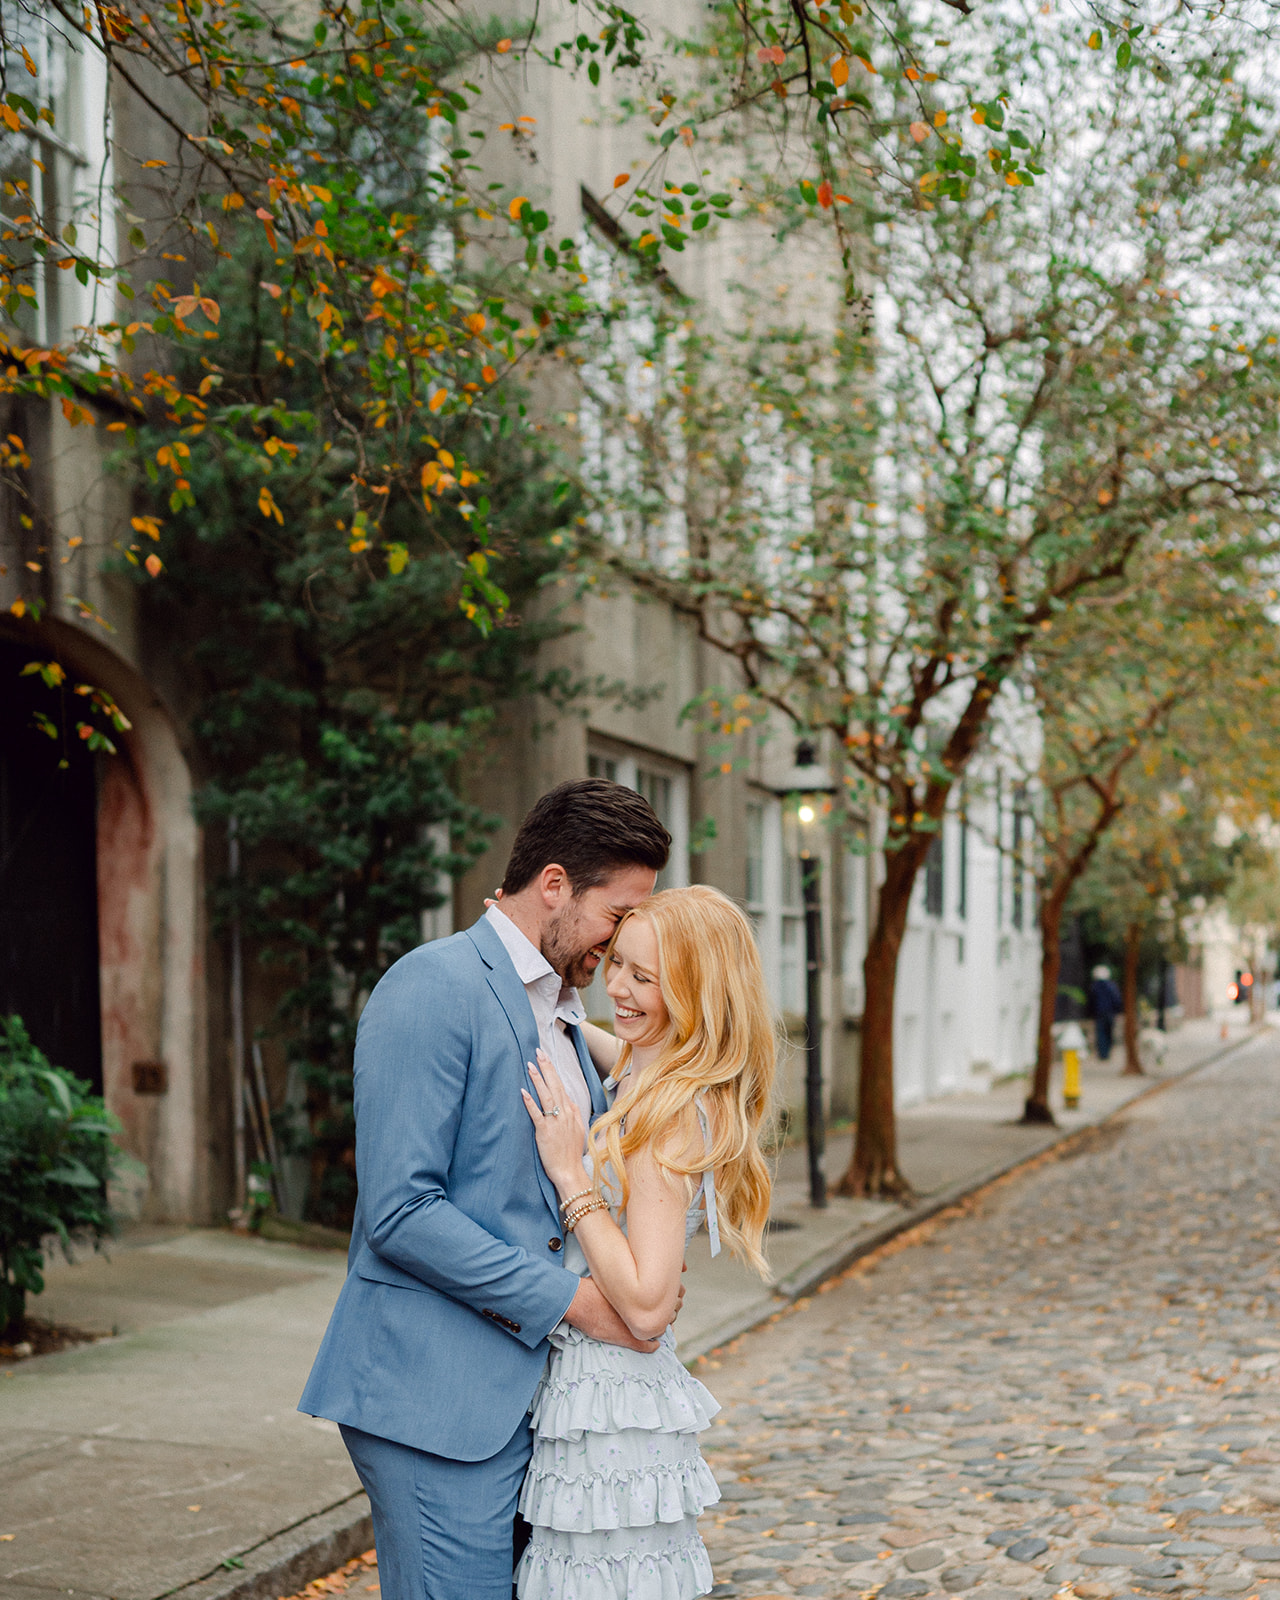 Husband and Wife embrace on the cobblestone streets of Charleston, SC.